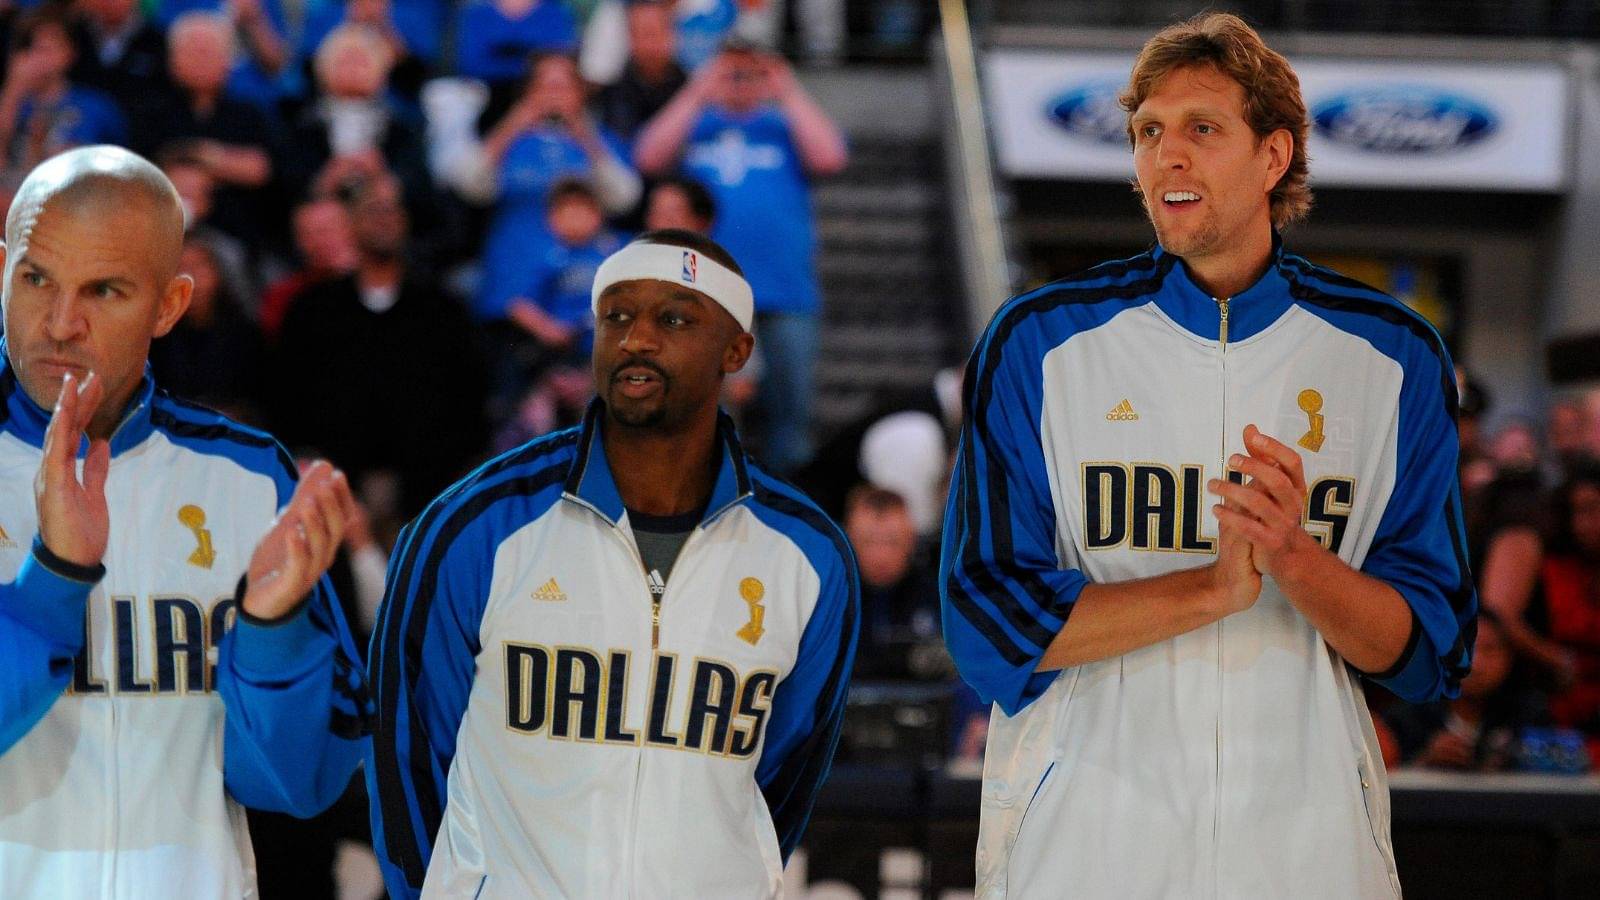 "You just can't give LeBron James freebies": Dirk Nowitzki's Hall of Fame teammate decodes The King, talks 2011 NBA Finals